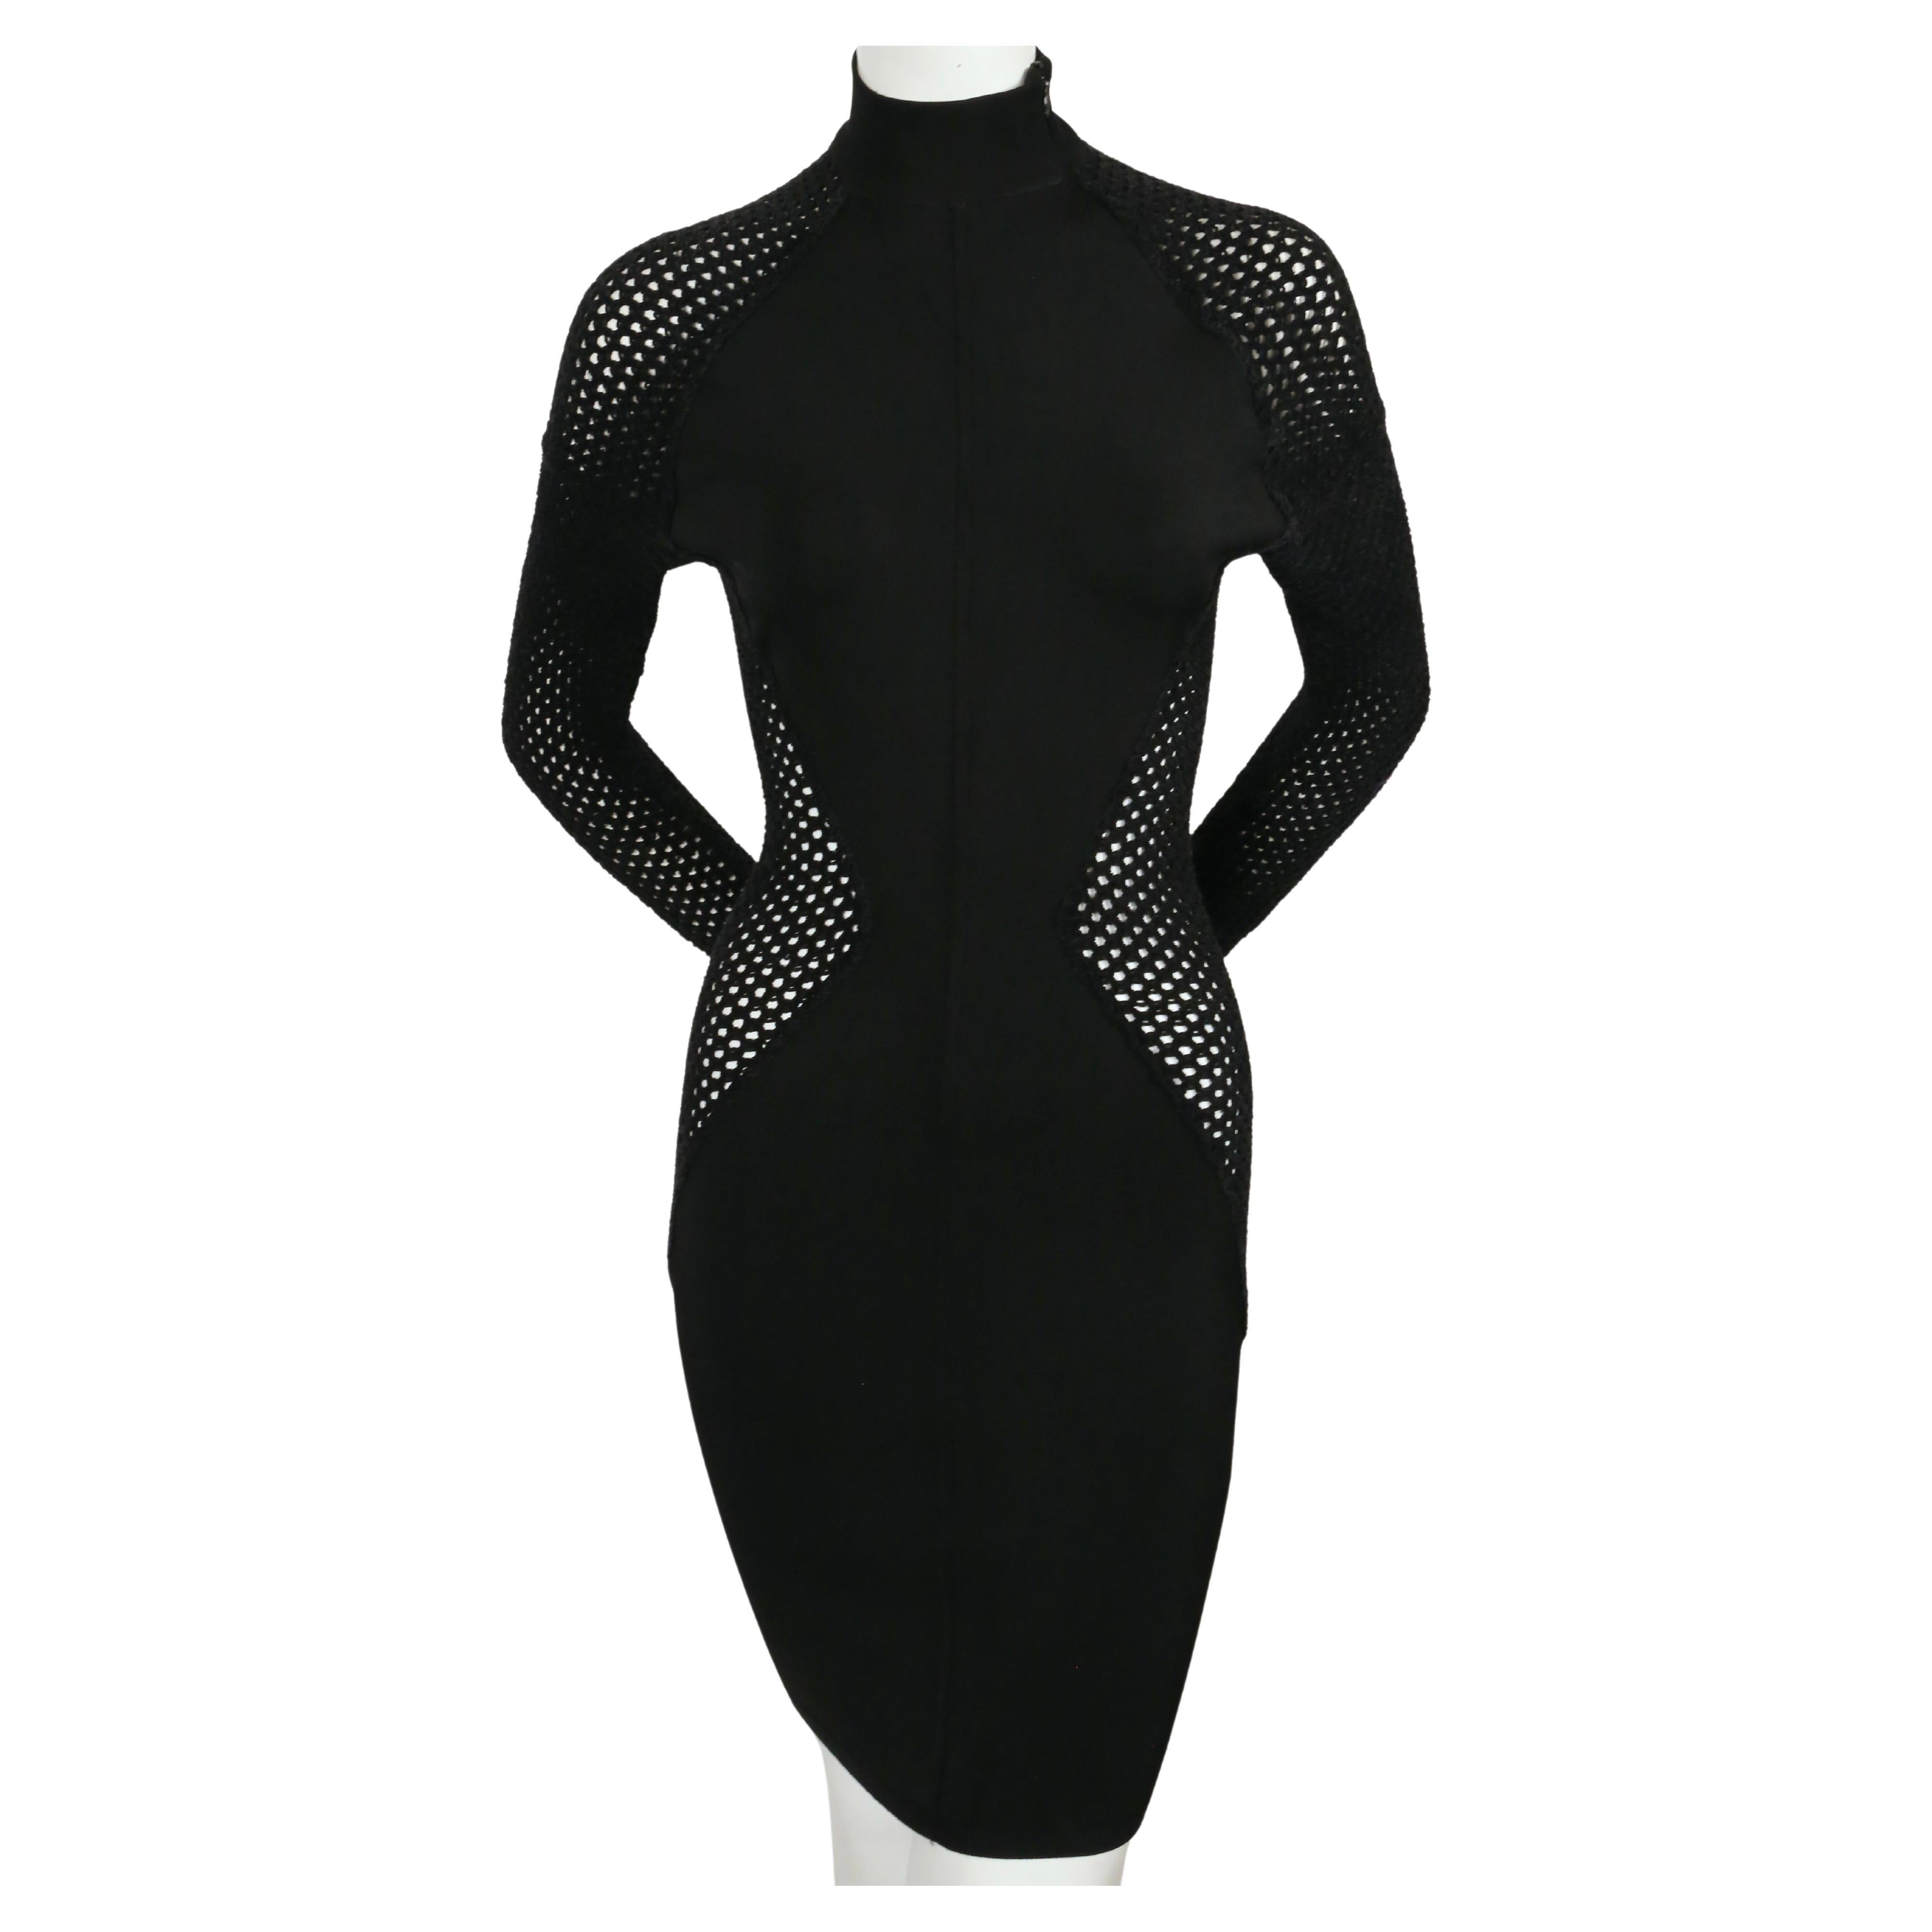 Black viscose dress with sheer, chenille, open-net panels designed by Azzedine Alaia, exactly as seen on the fall 1989 runway.  The main portion of the dress is made of a cool to the touch viscose and the net portion is made of a textured chenille